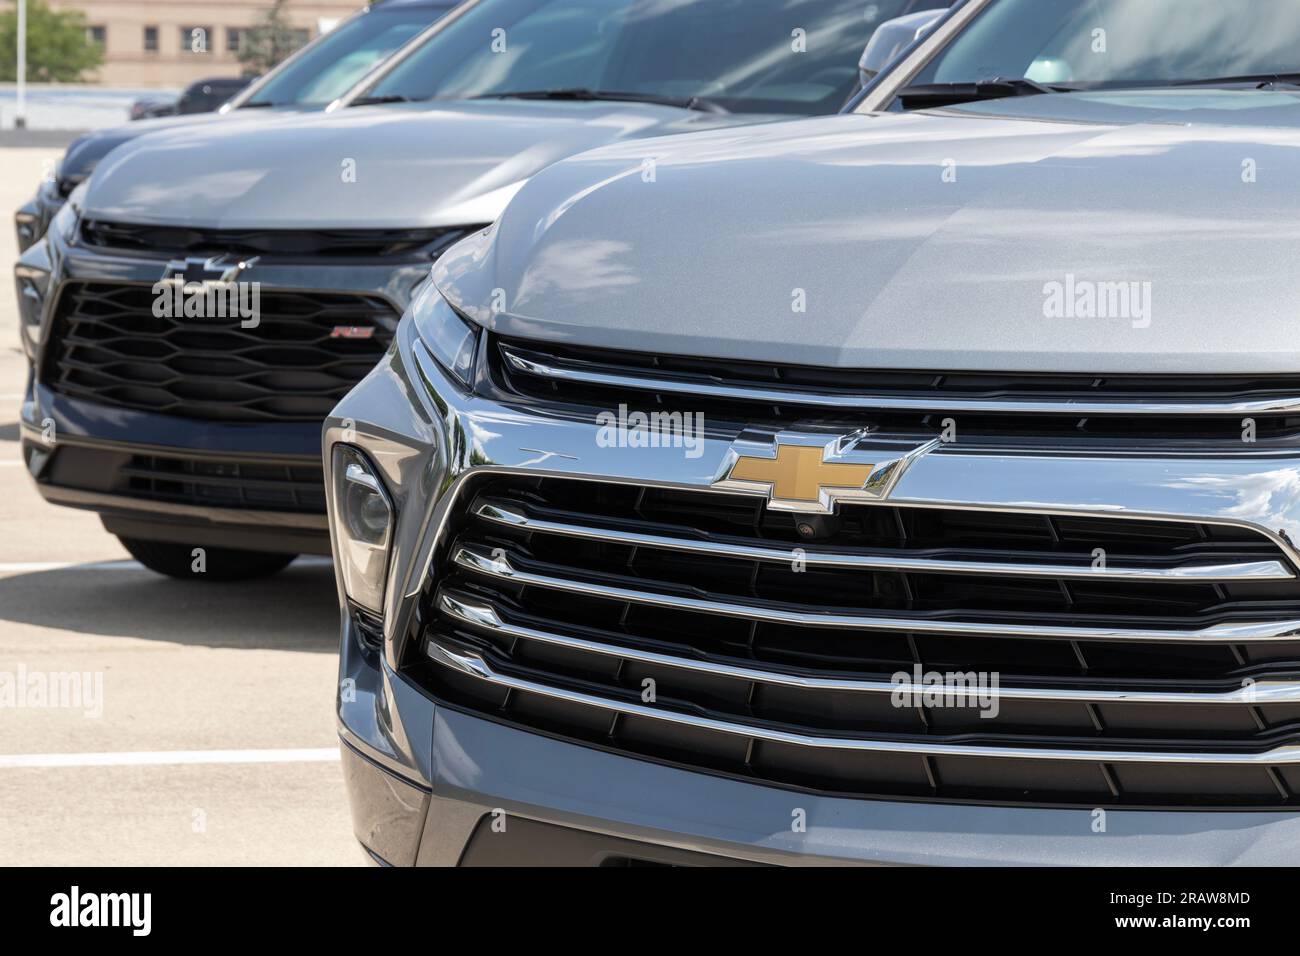 Indianapolis - July 4, 2023: Chevrolet Blazer display at a dealership. Chevy offers the Blazer in 2LT, 3LT and RS models. Stock Photo